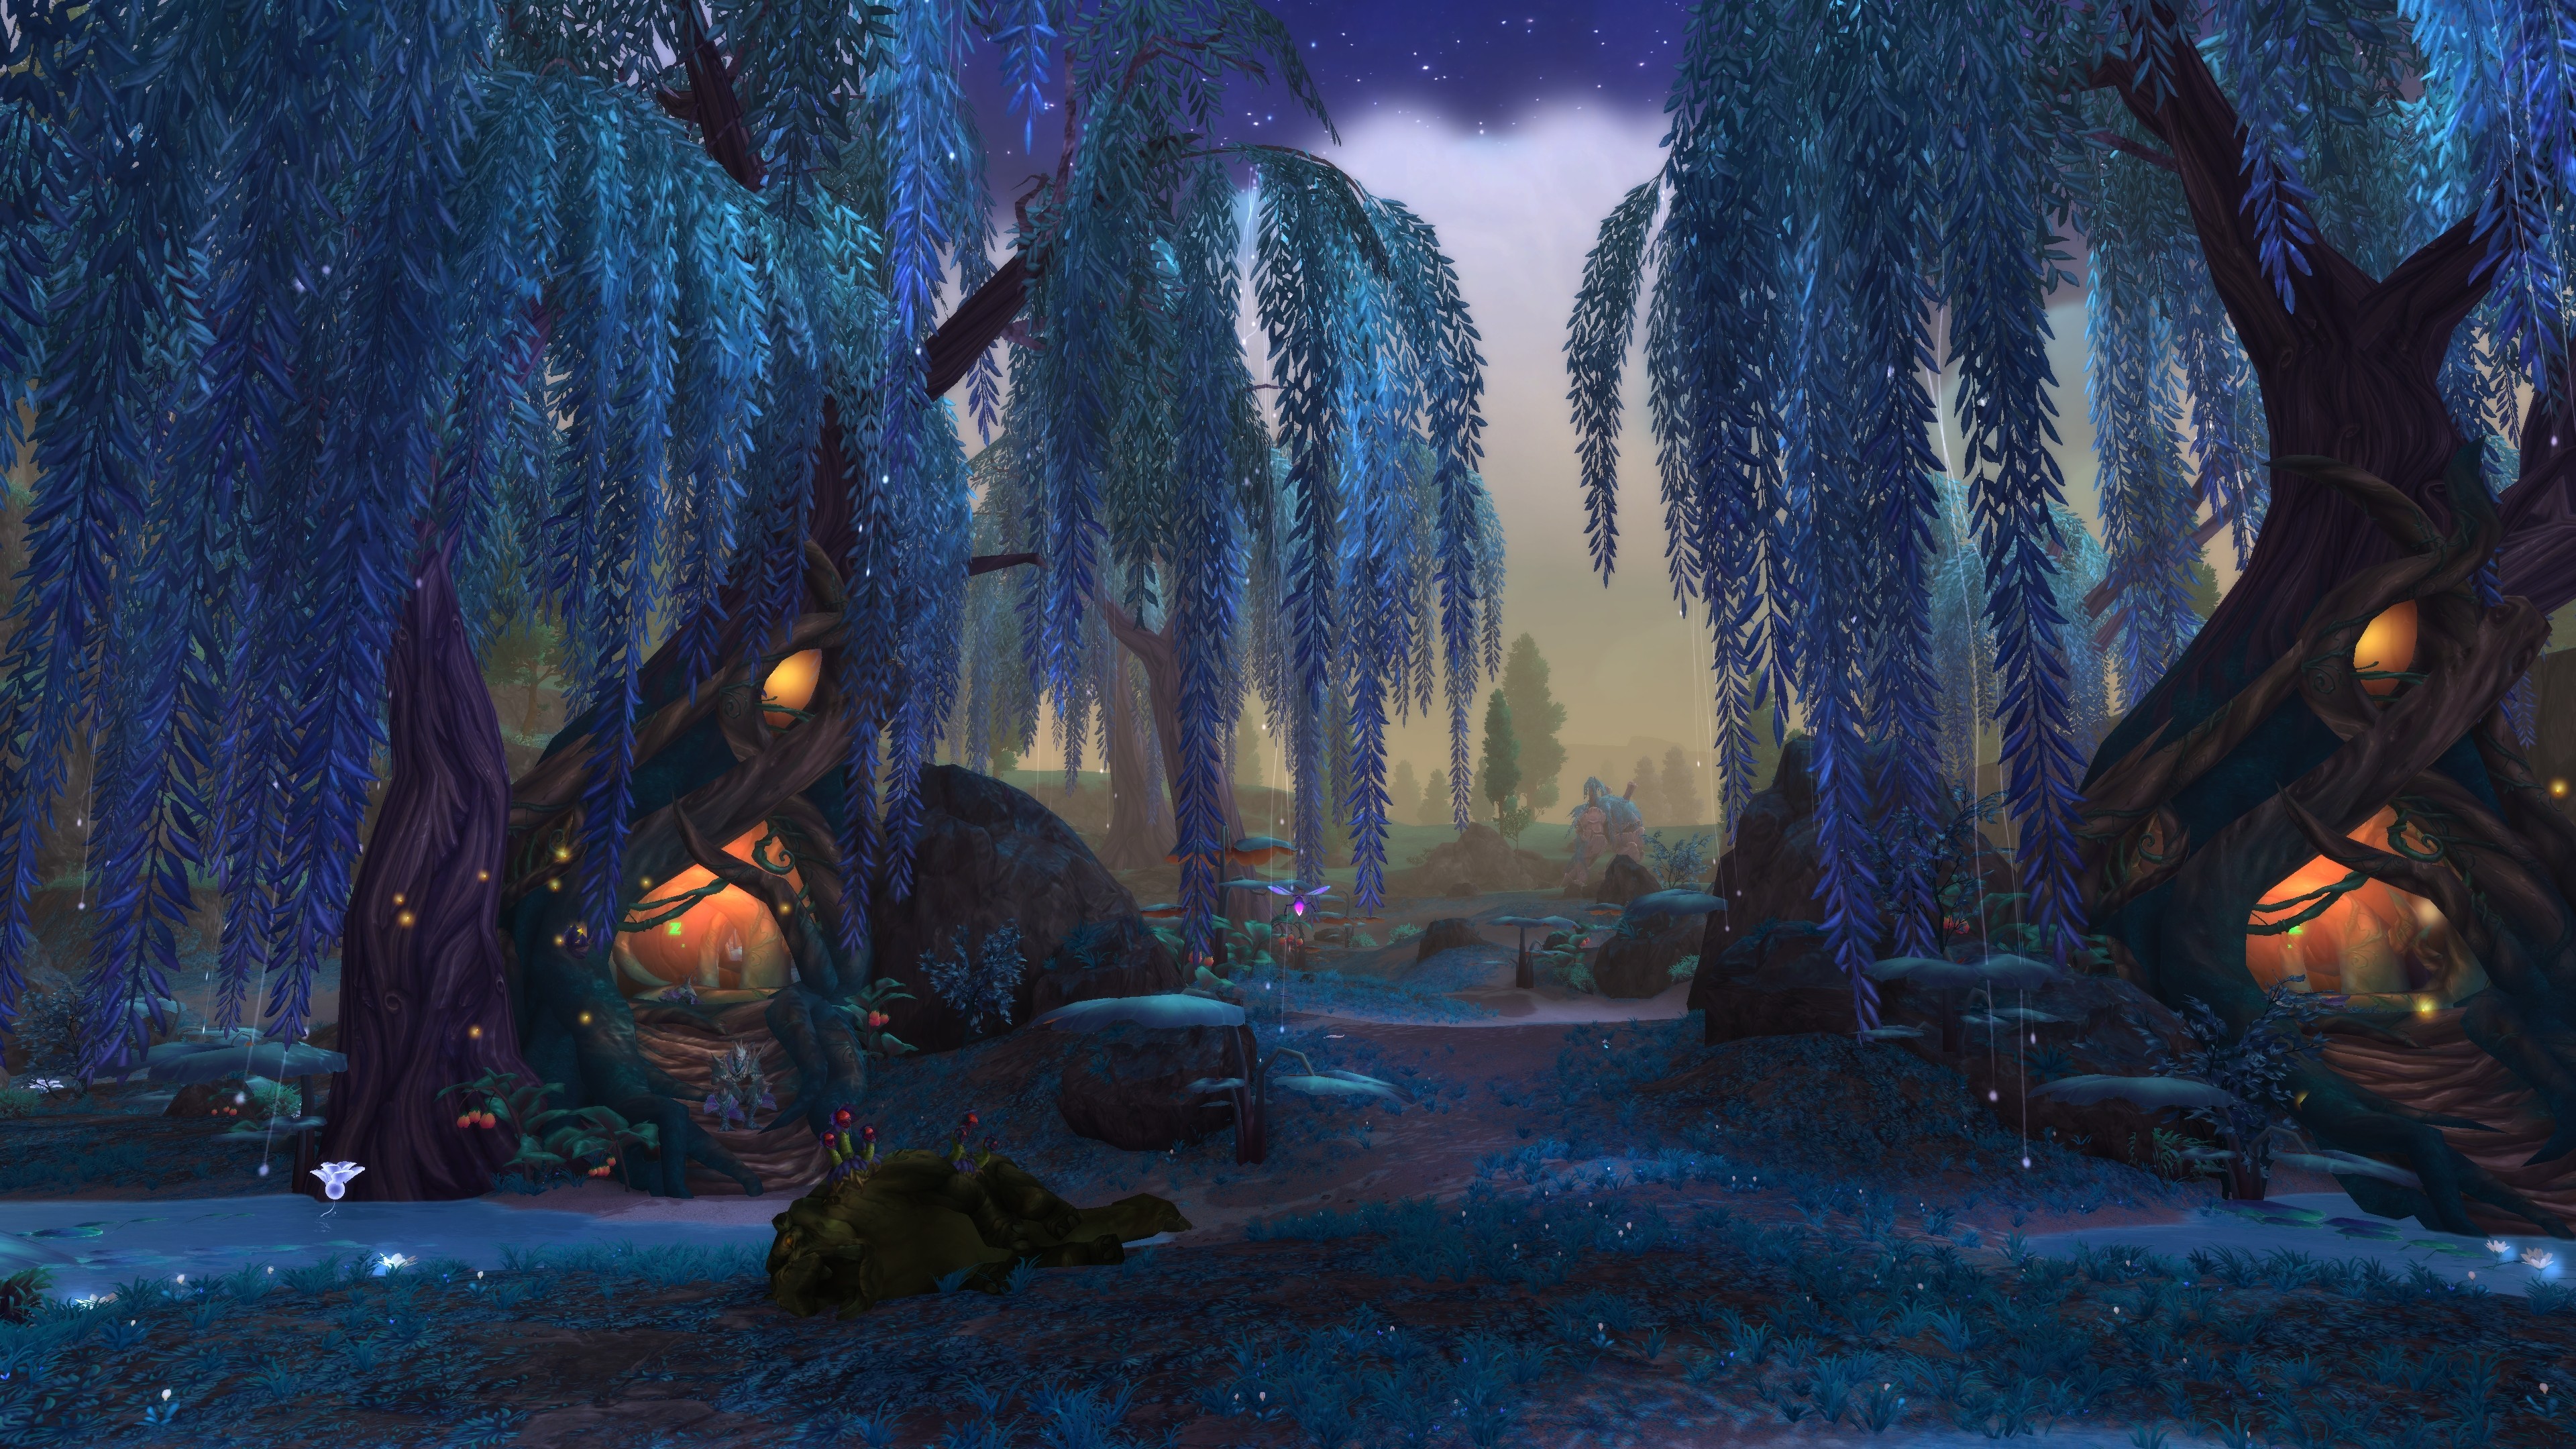 General 3840x2160 World of Warcraft: Warlords of Draenor World of Warcraft video games PC gaming screen shot